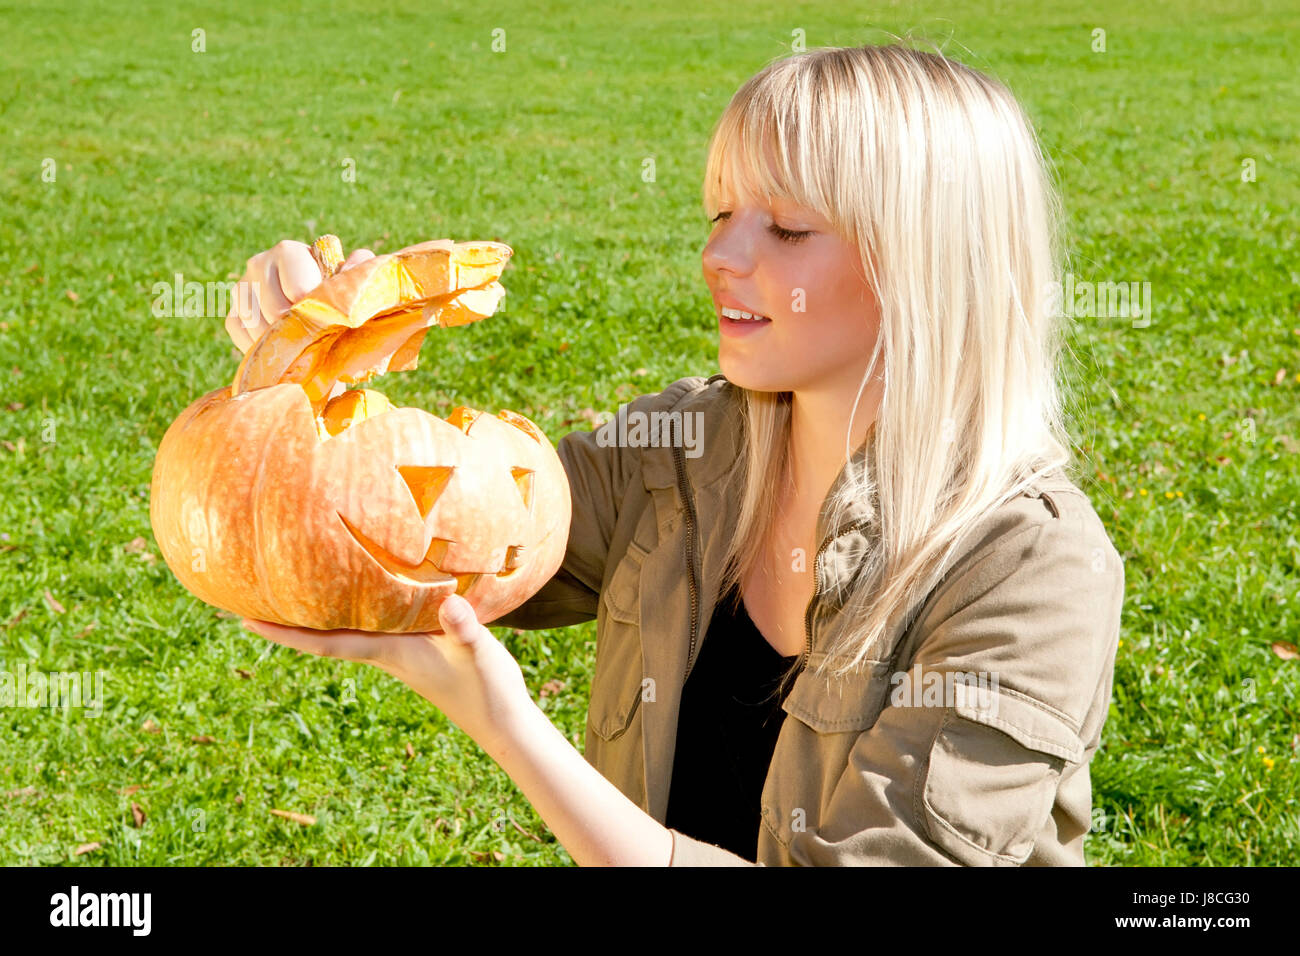 young woman with halloween pumpkin Stock Photo